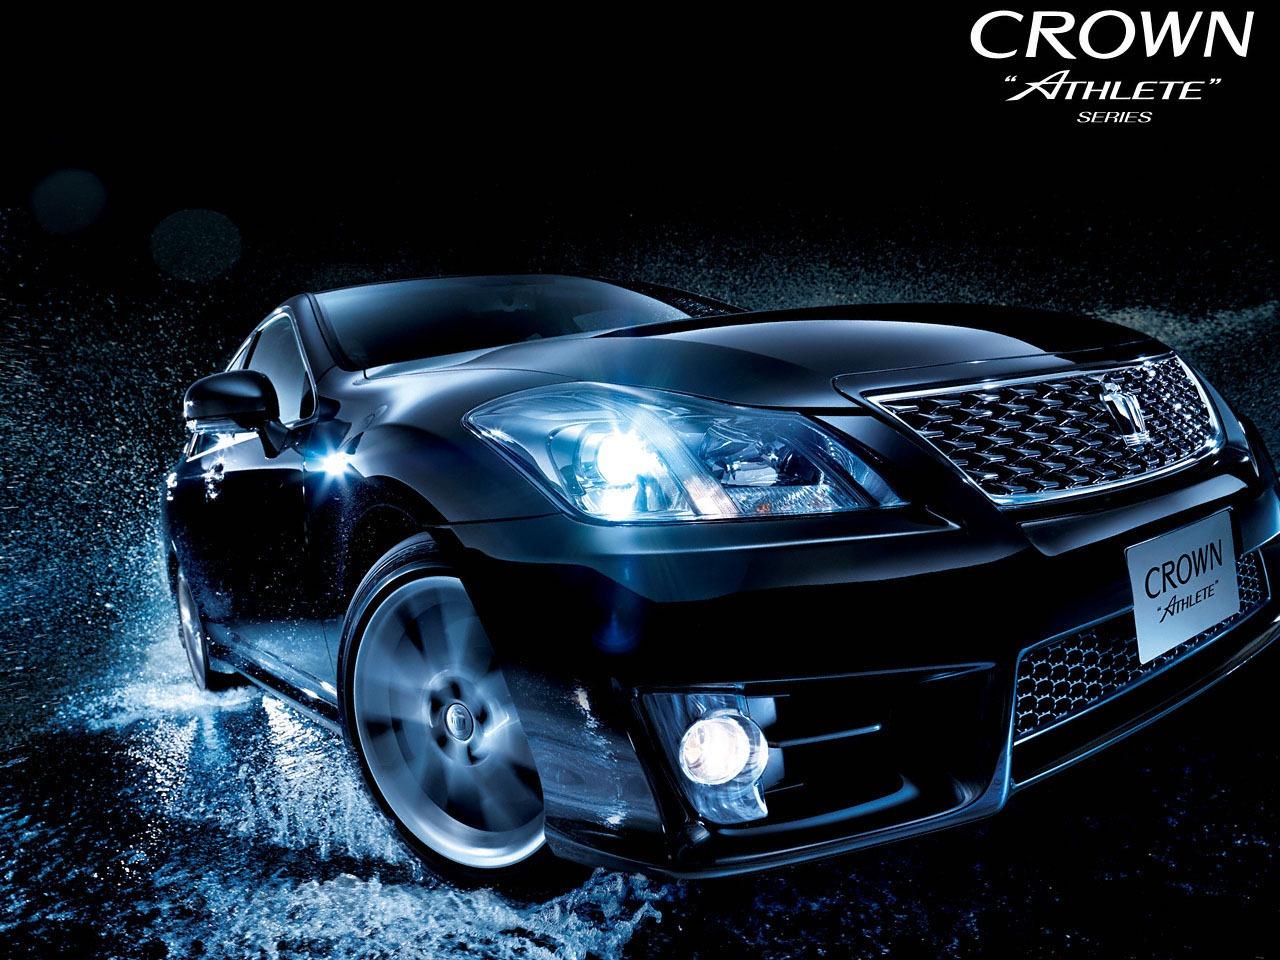 Toyota Crown 2013 photo 90348 picture at high resolution